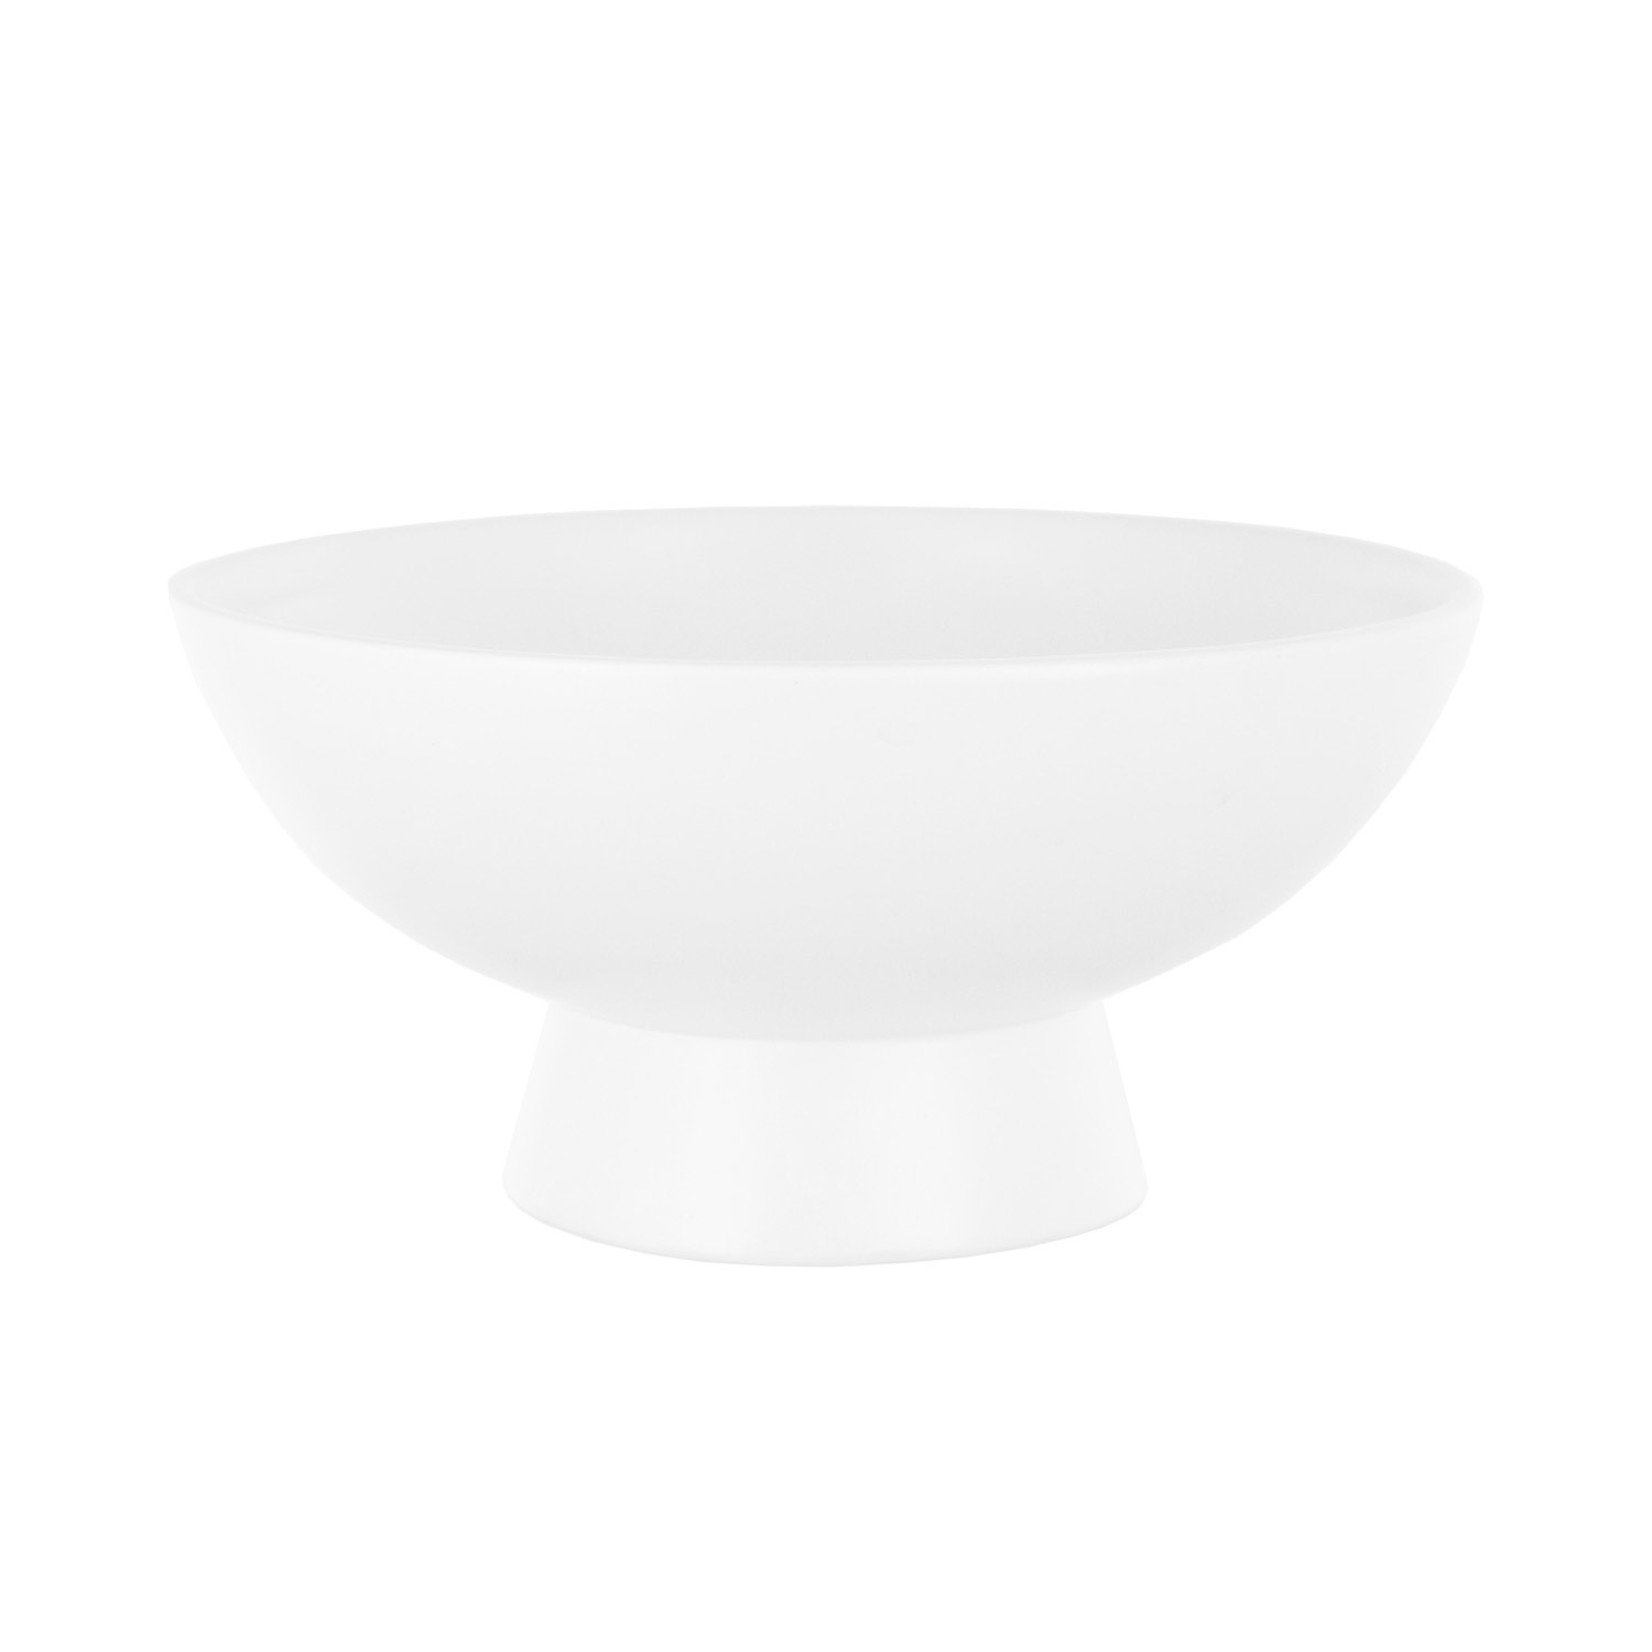 4”H X 8”D WHITE DEMI FOOTED BOWL